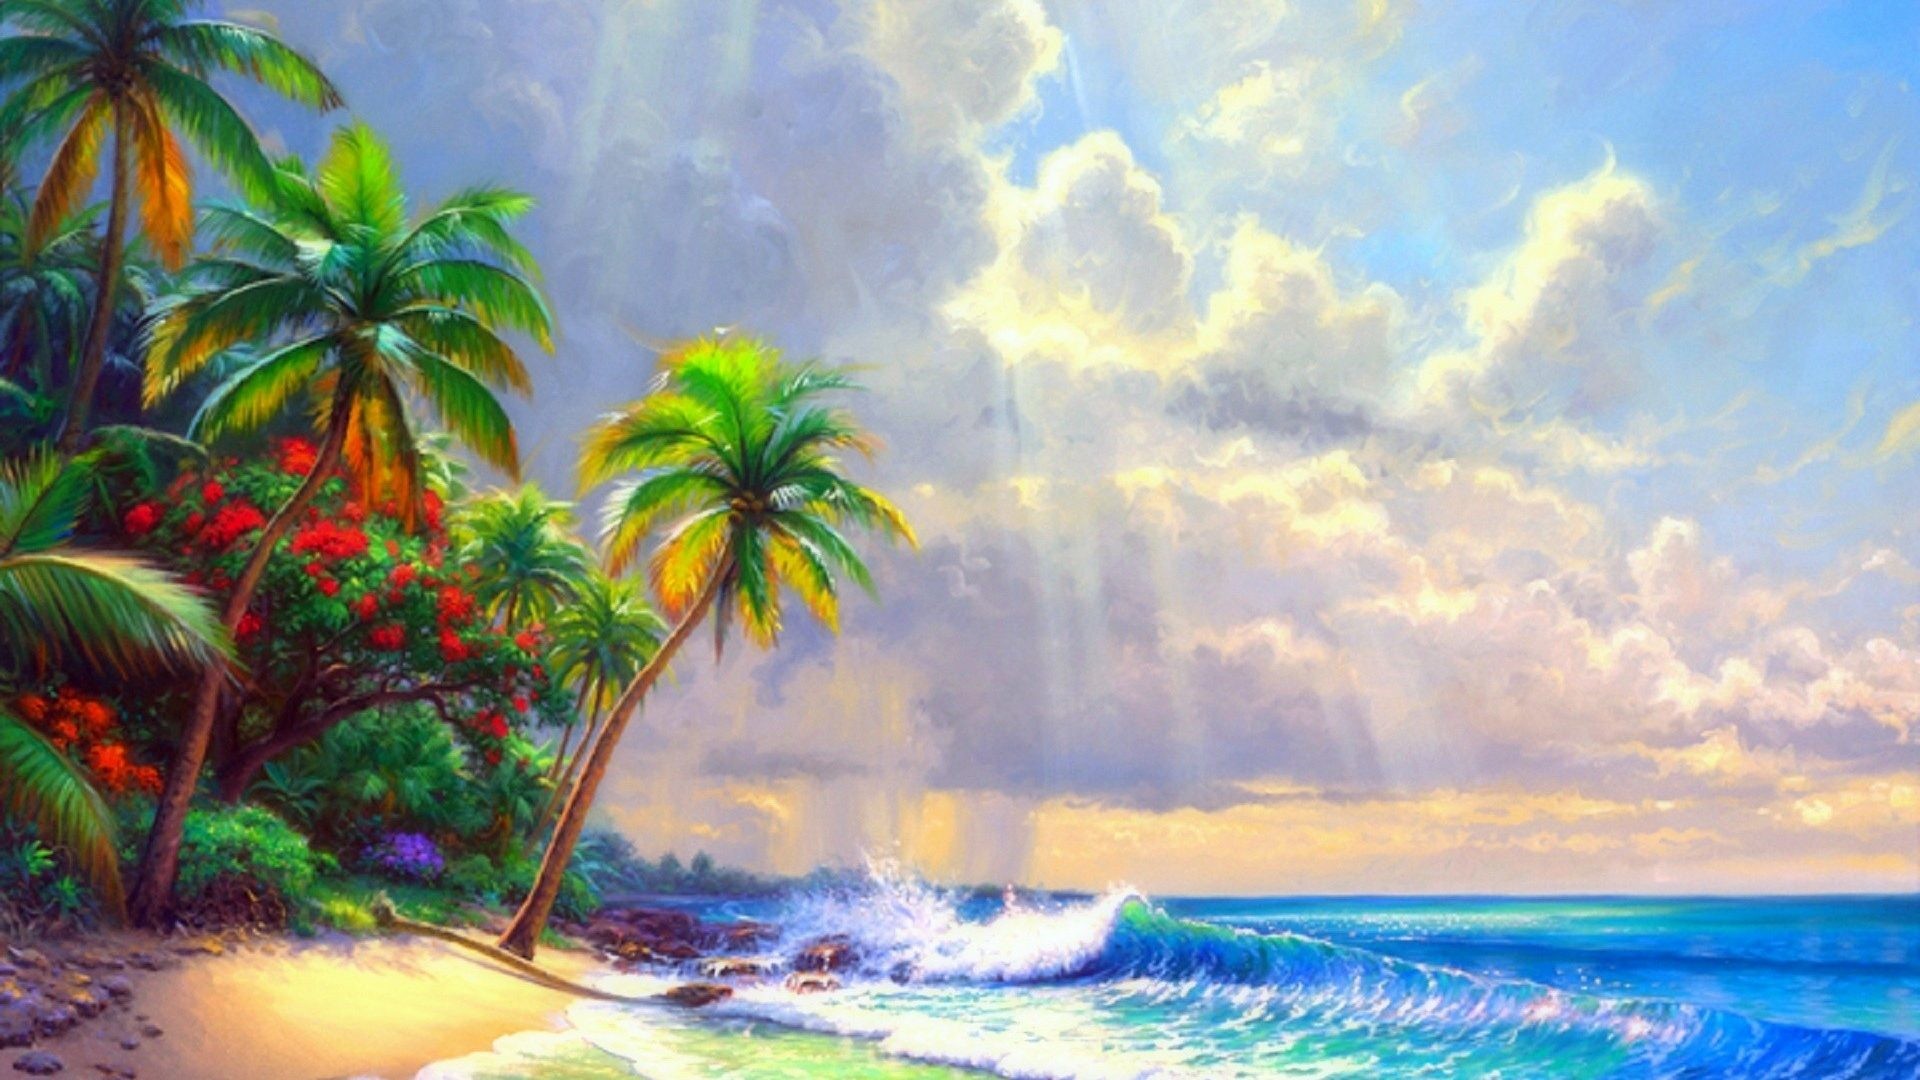 1920x1080 Panoramic Tag - Sea Paintings Getaways Sky Nature Clearing Bright Beaches  Relaxing Creative Tropical Scenery Clouds